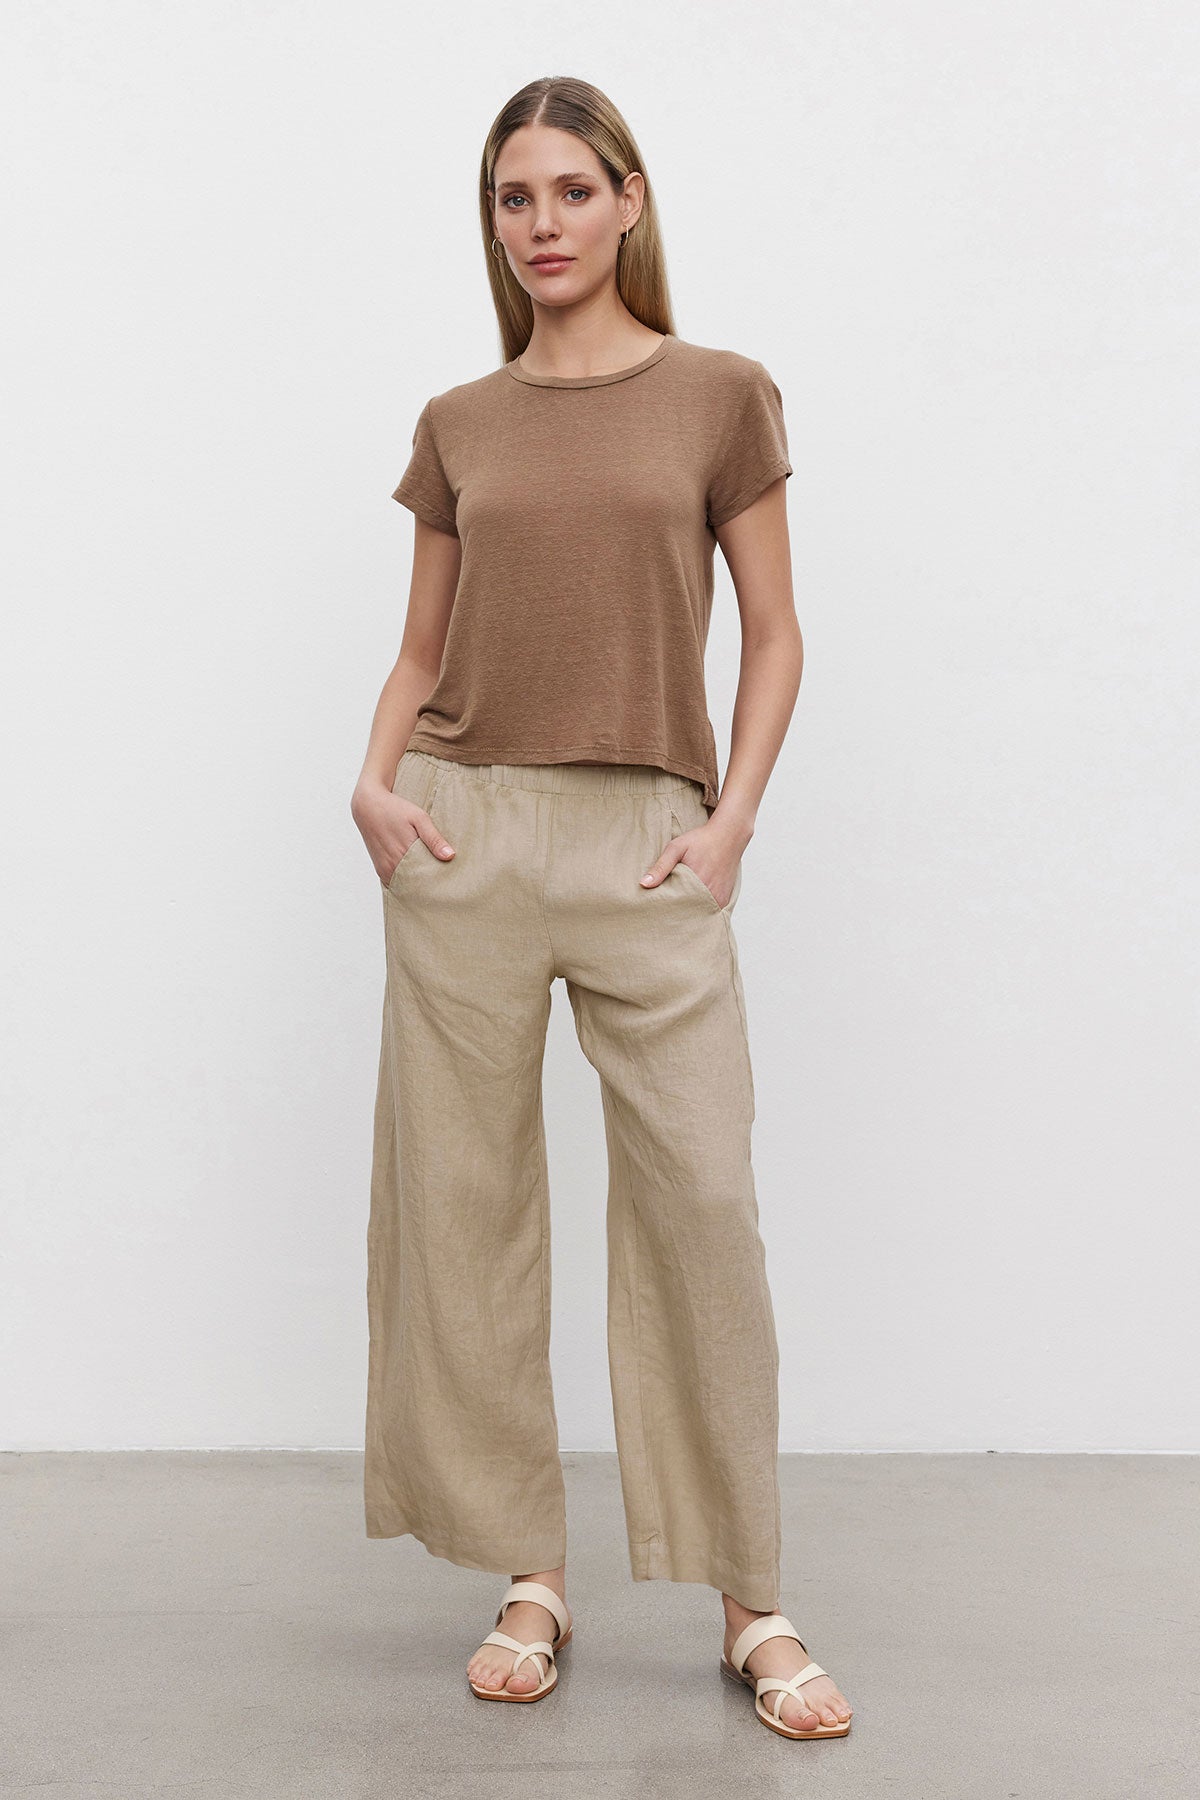 A woman stands in a neutral pose wearing a brown t-shirt, Velvet by Graham & Spencer LOLA LINEN PANTS with an elastic waist, and white sandals against a plain backdrop.-36220935176385